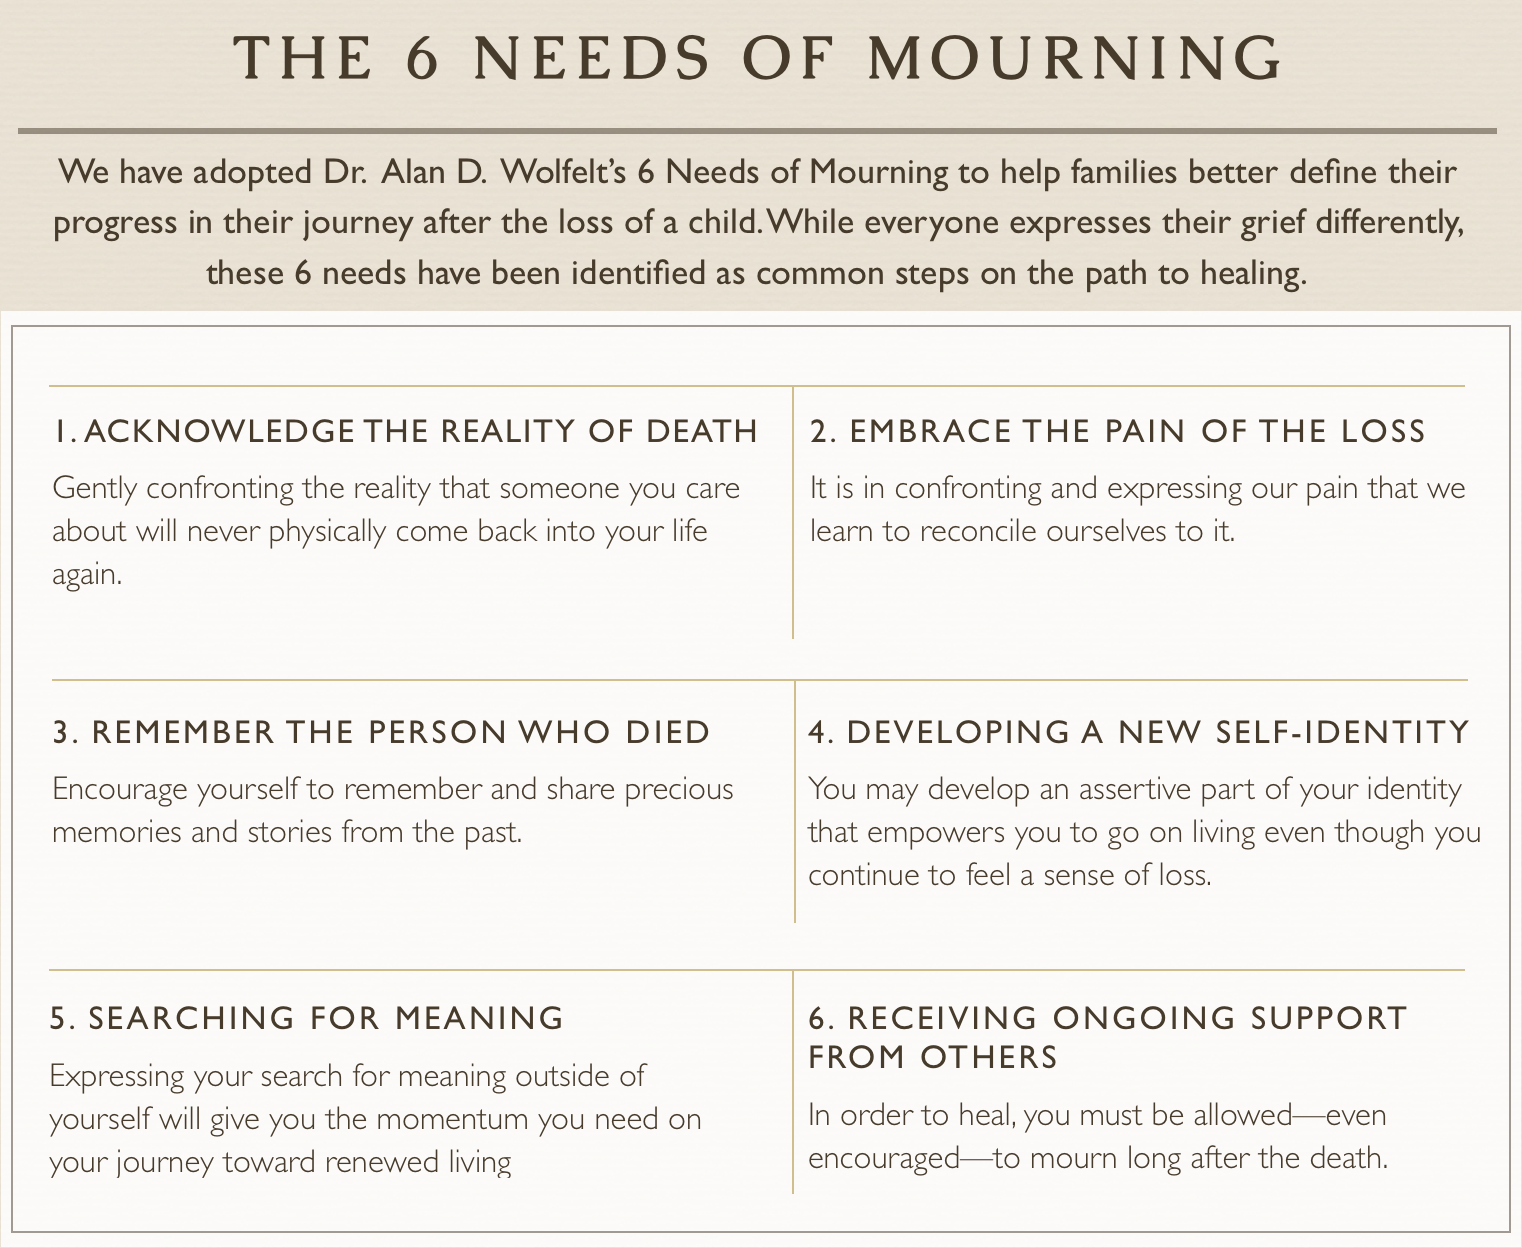 The 6 Needs of Mourning